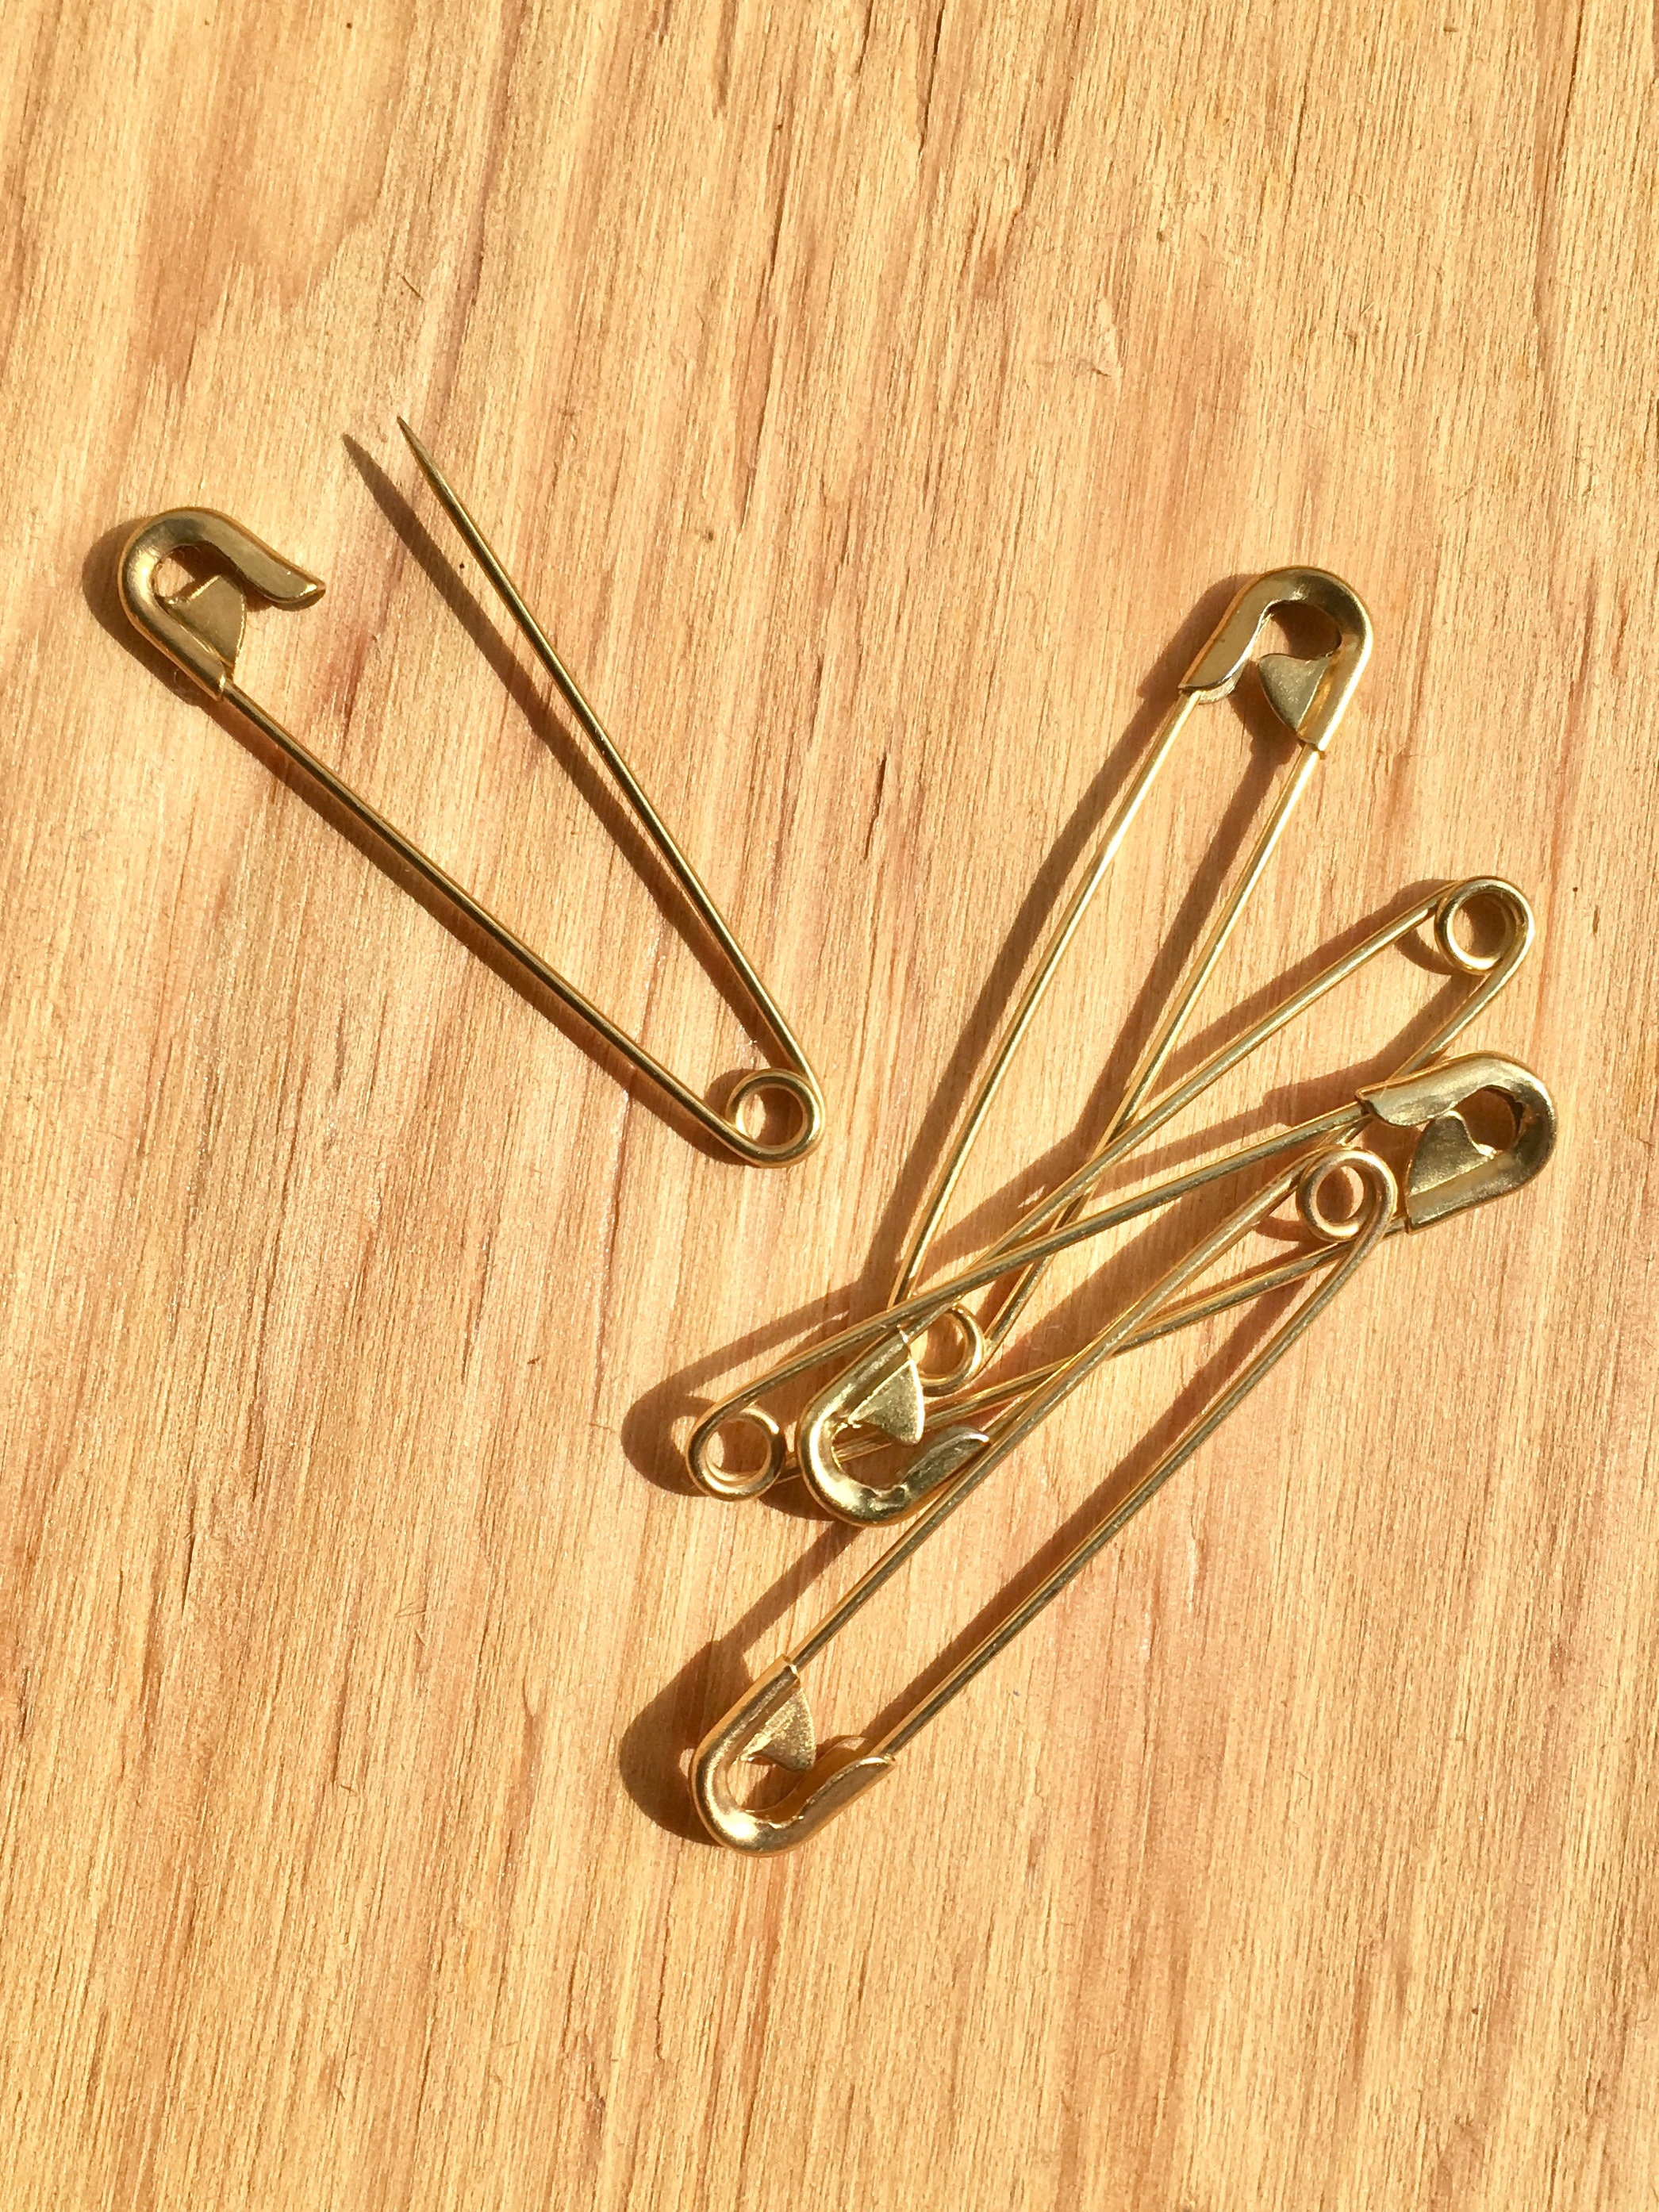 Buy Defender Safety Pins in Box Mid Century Box of Large Steel Safety Pins  2 Safety Pins Online in India 